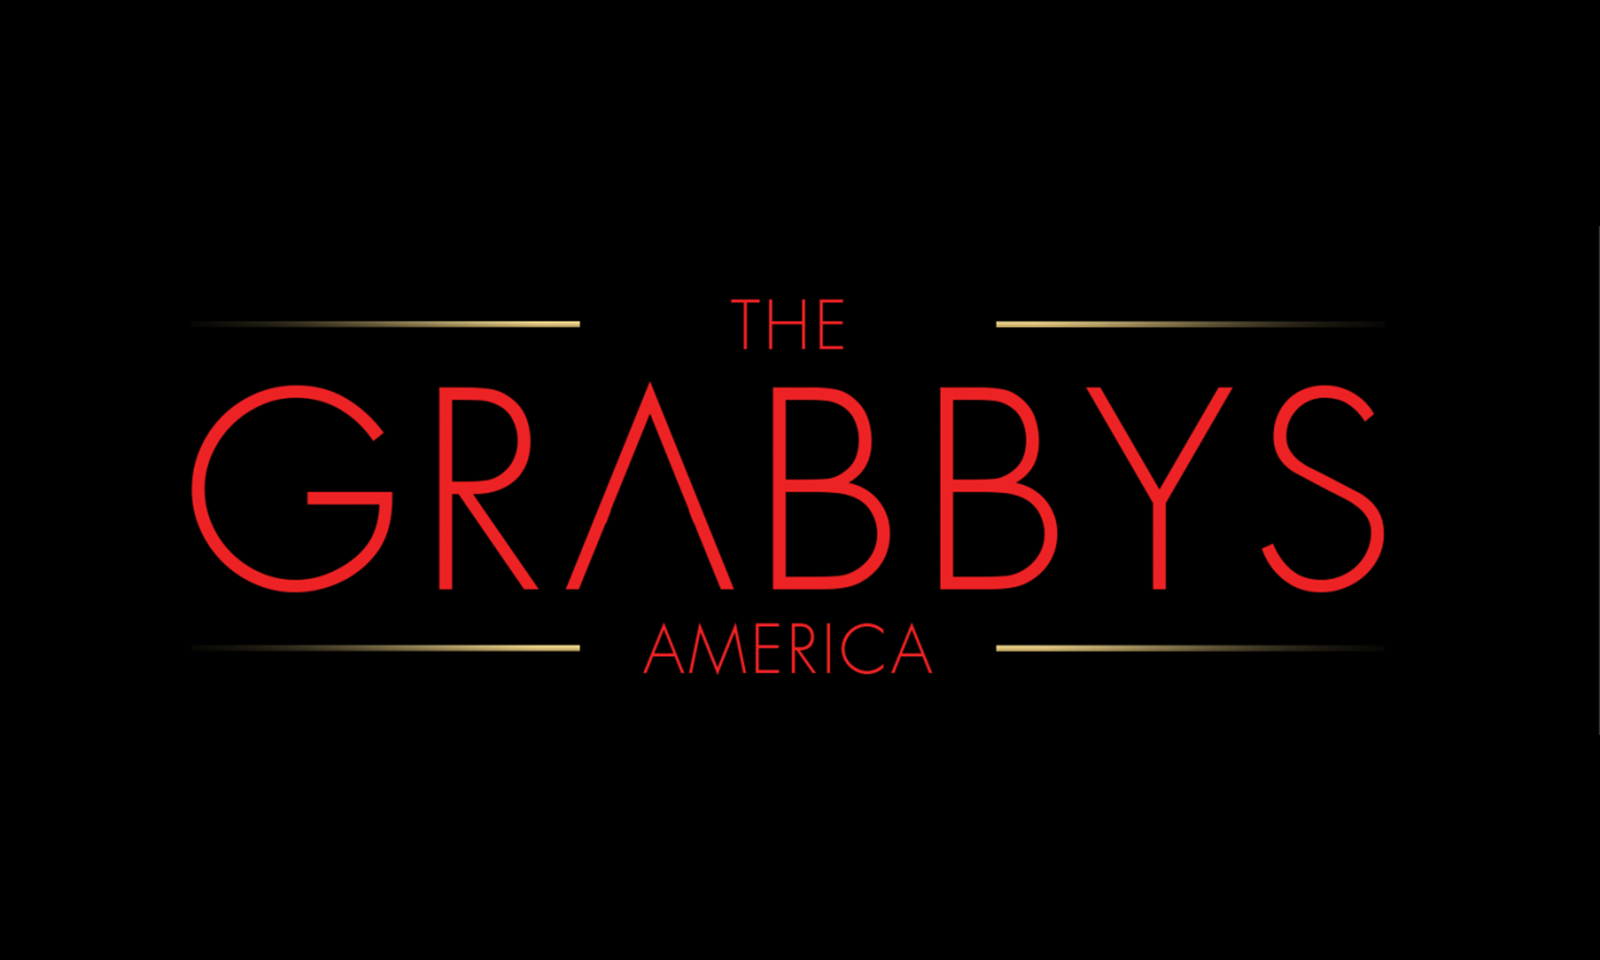 Nominations for 2024 Grabbys America Announced